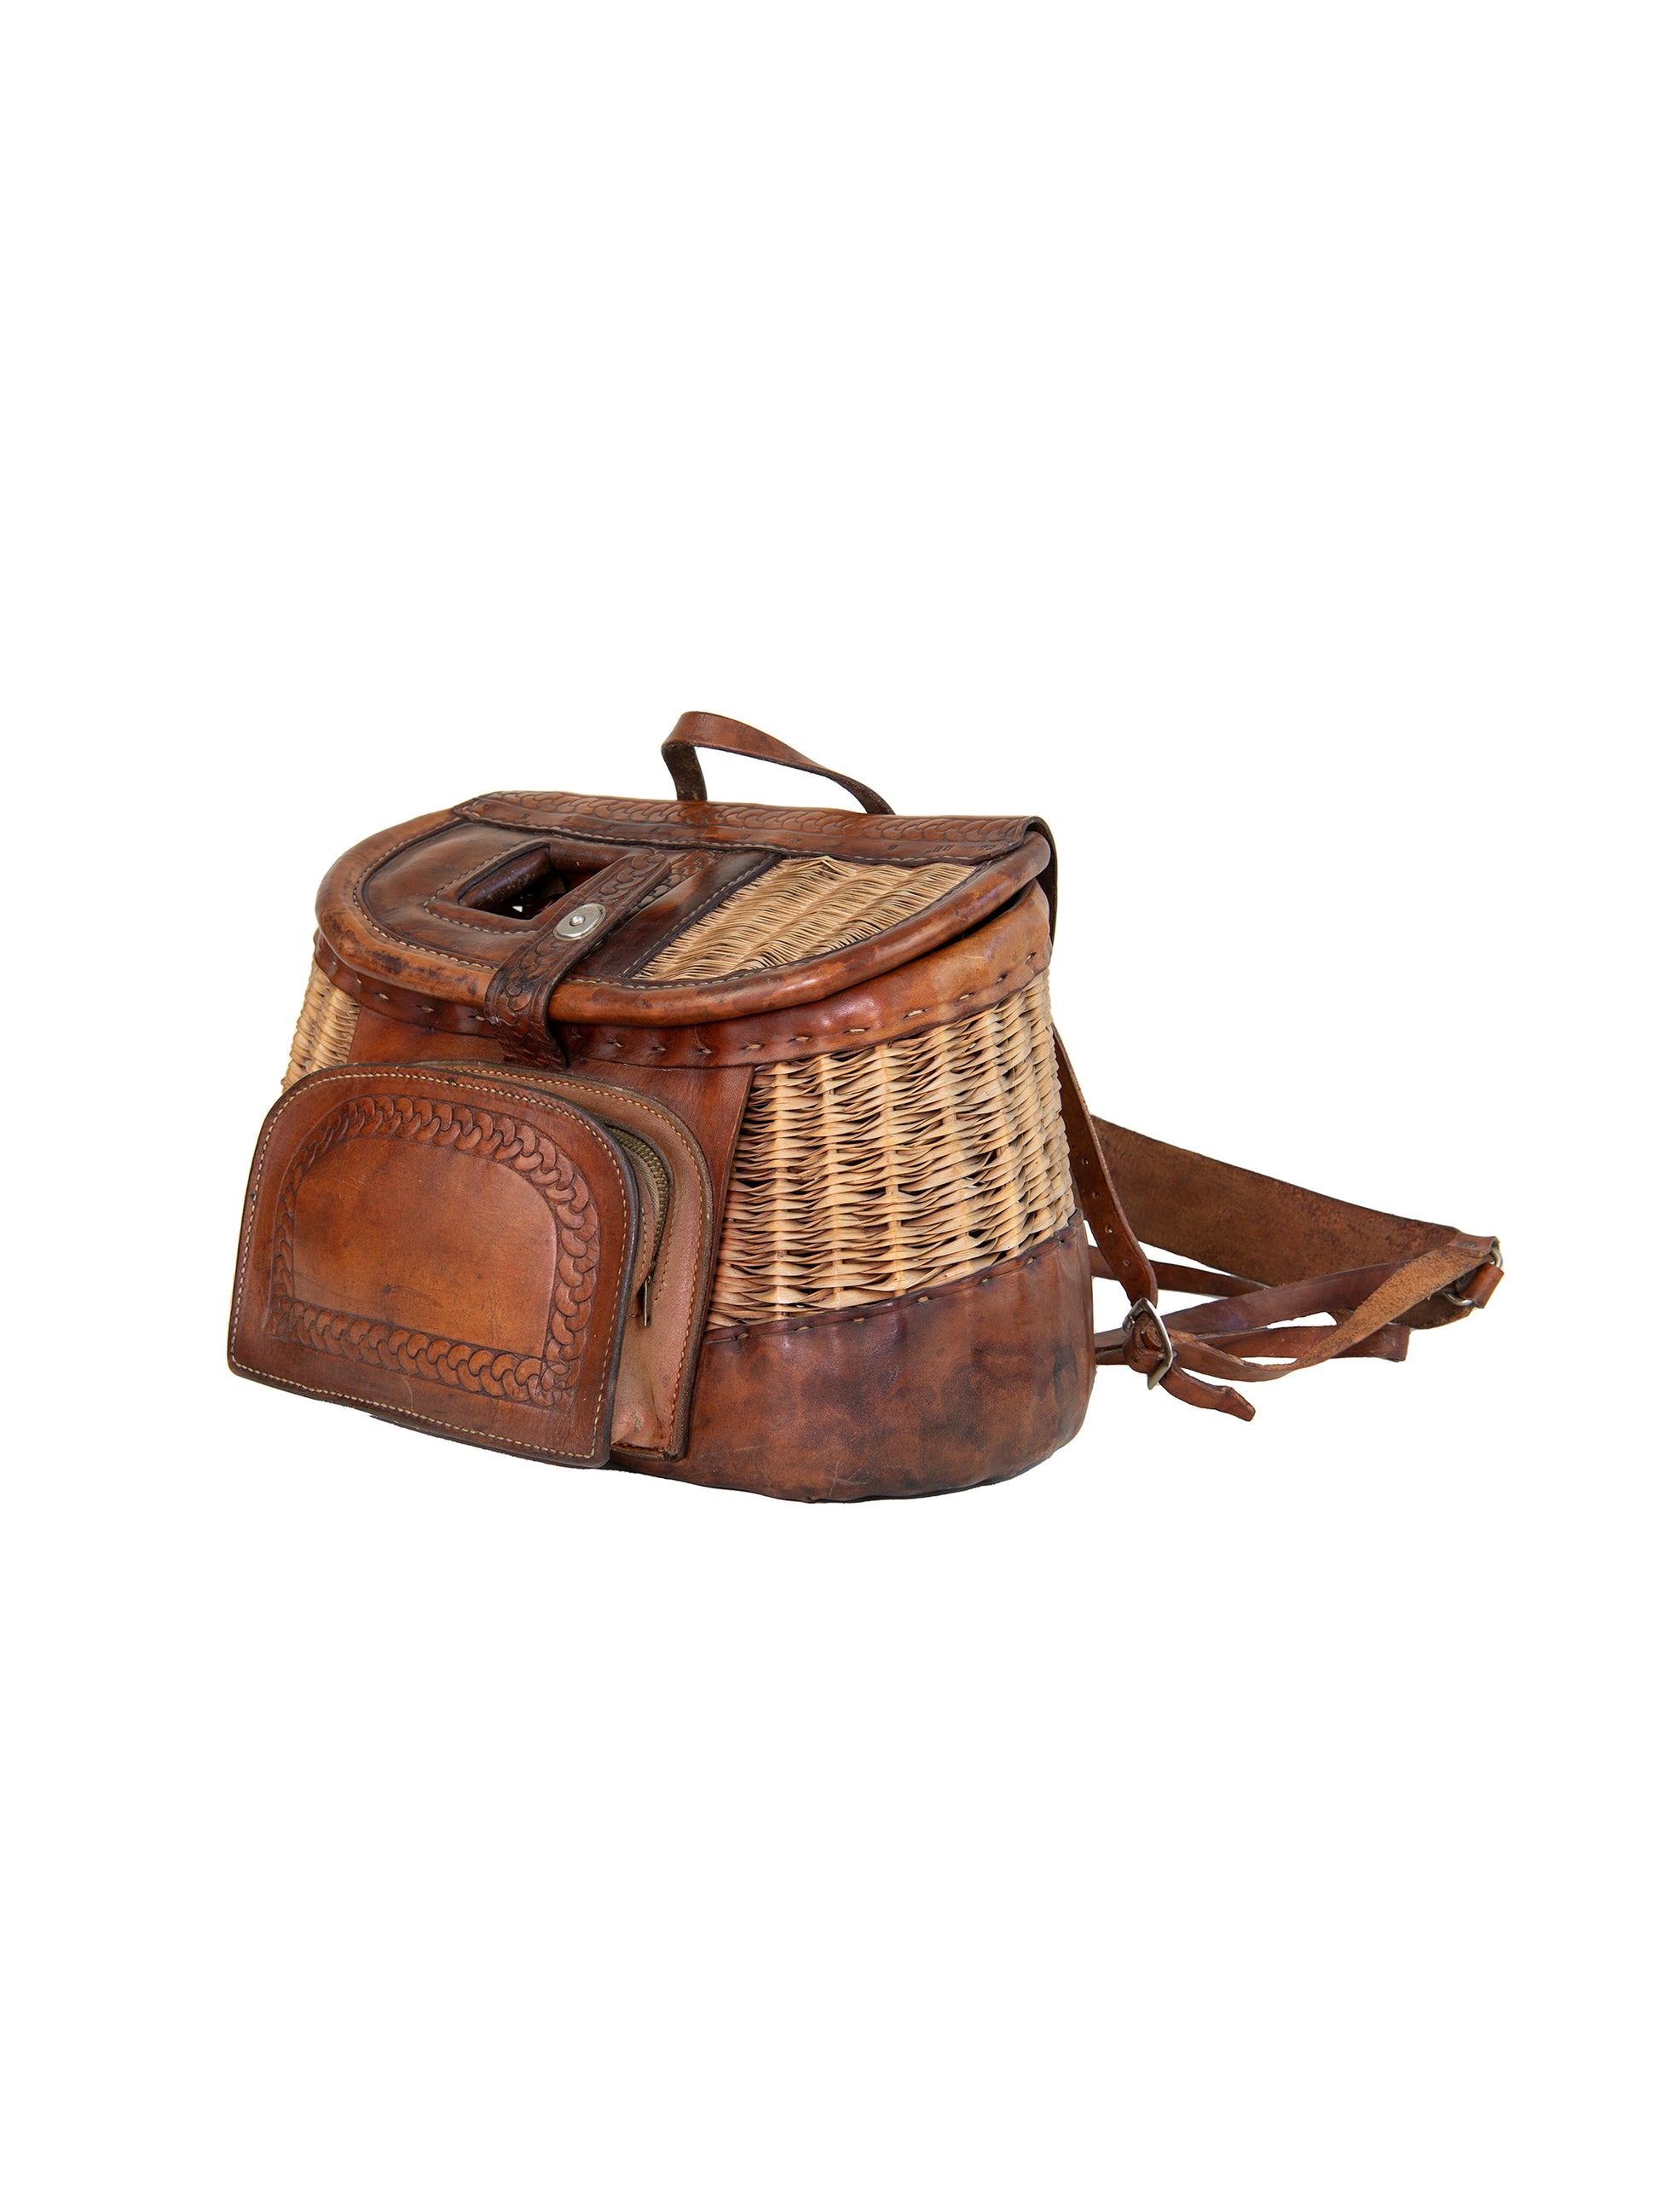 This unusual vintage fishing creel has leather shoulder straps and